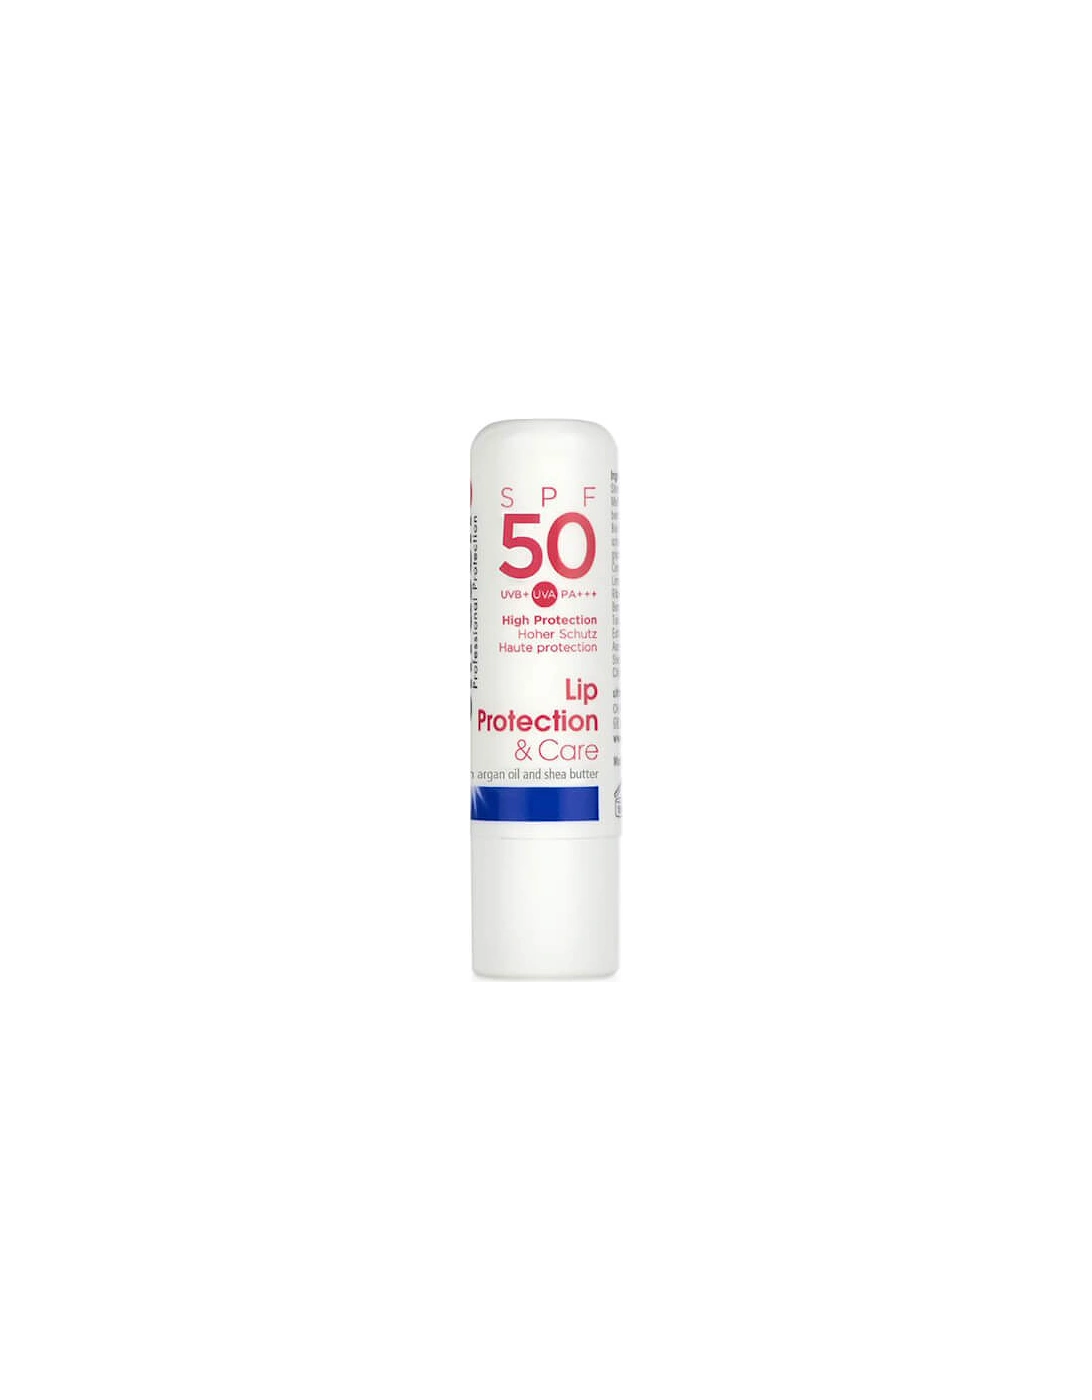 Lip Protection SPF50, 2 of 1